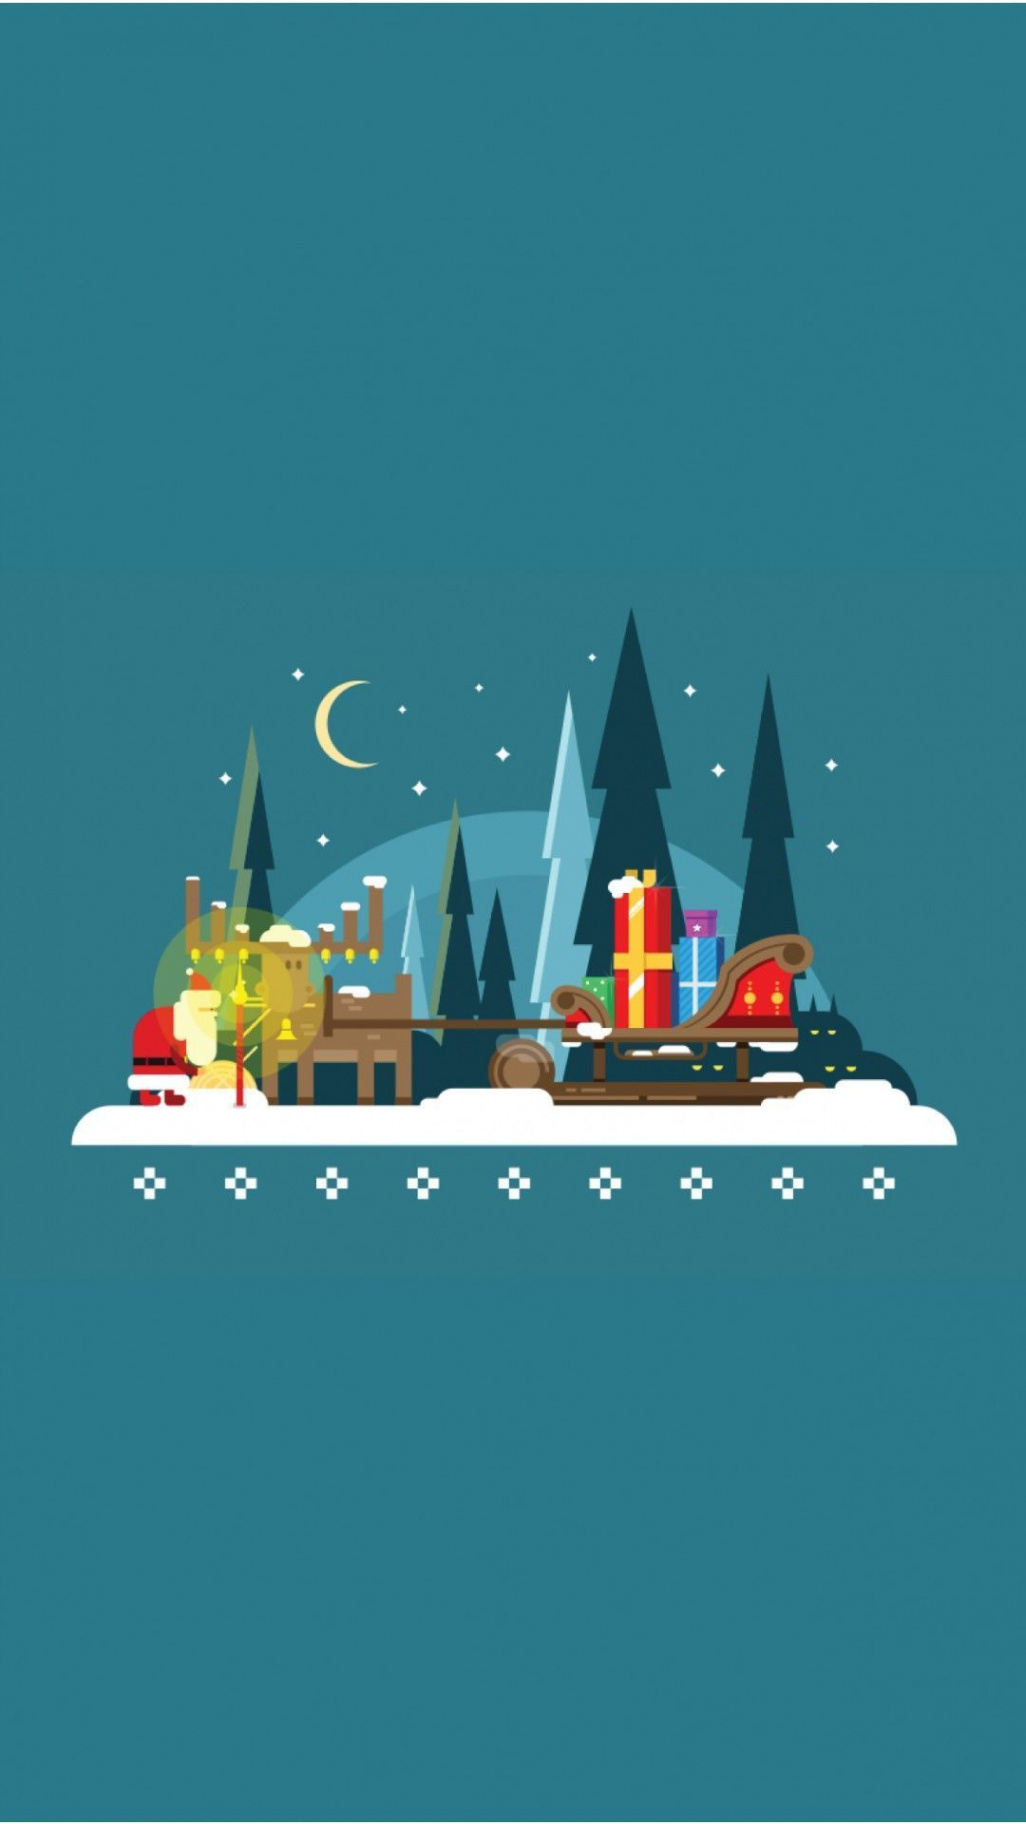 Minimalist Christmas Wallpapers for Desktop and iPhone